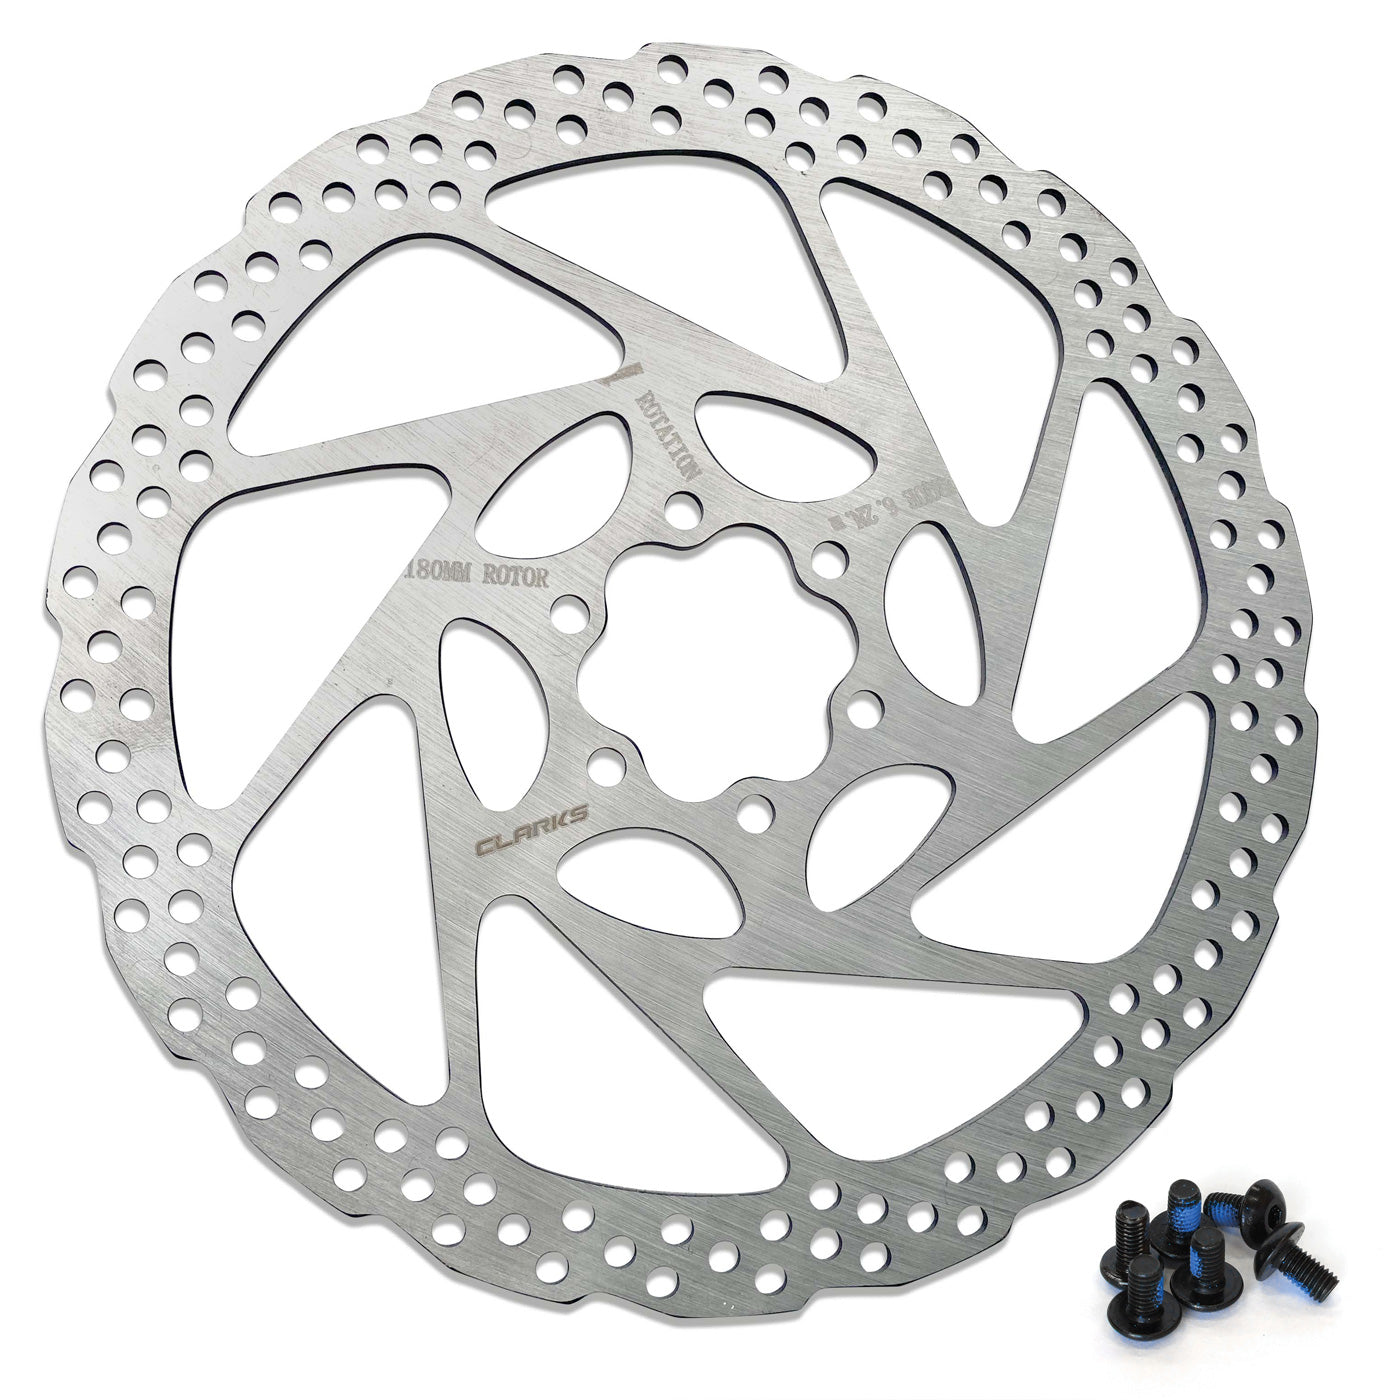 View EBike Specific Single Piece Rotor 160mm information